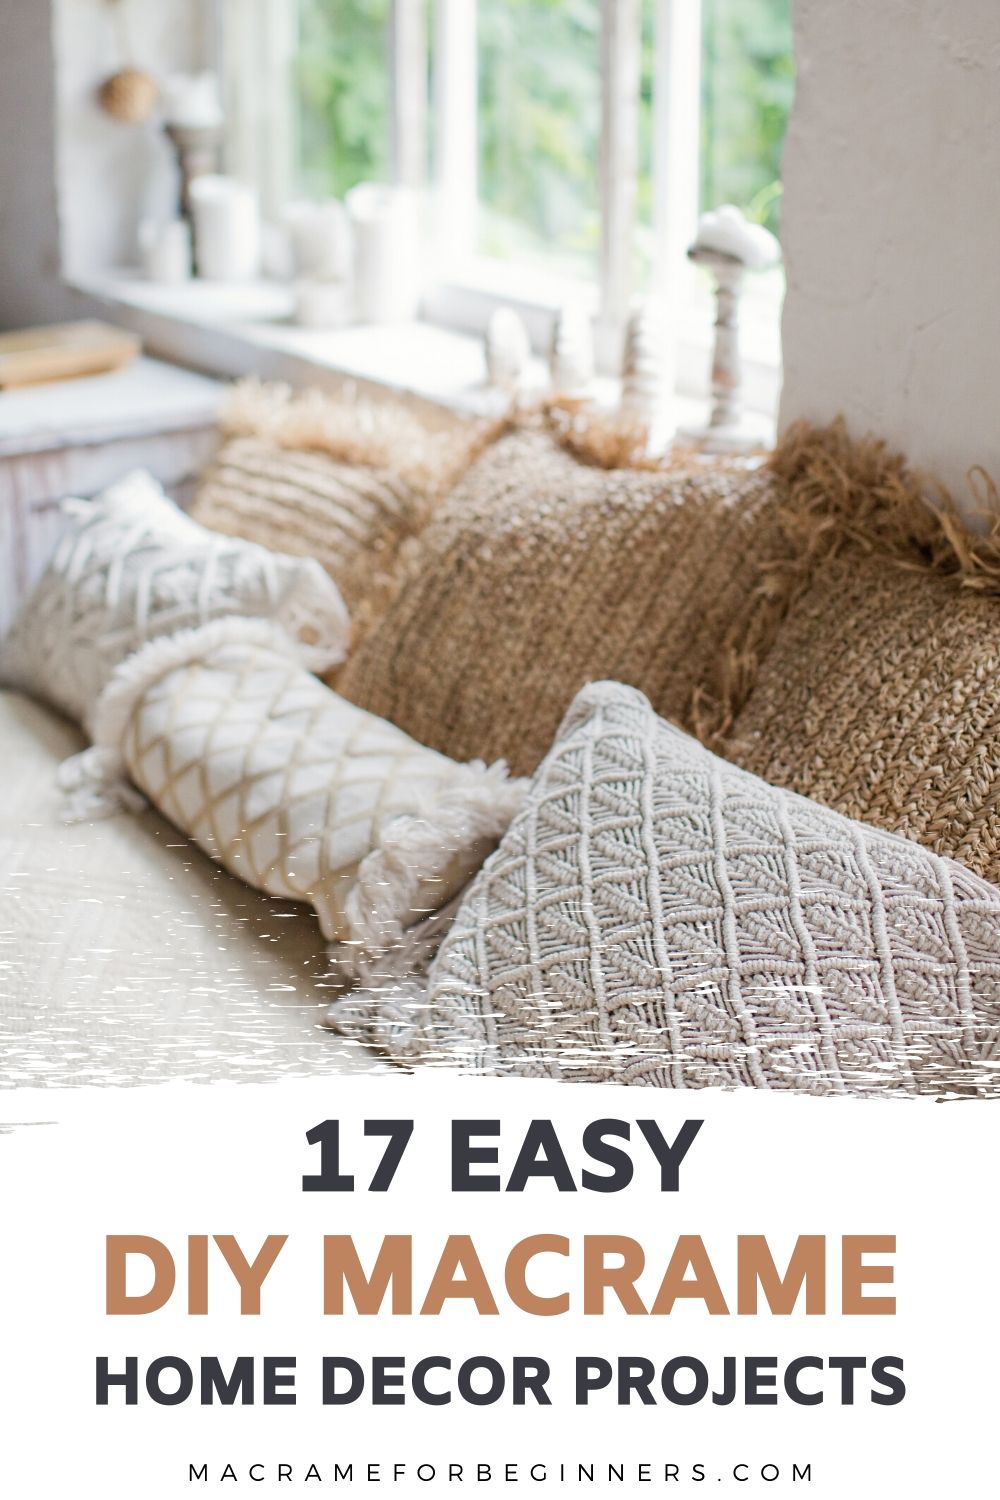 17 BOHO Macrame Home Decor Projects for Beginners - Macrame for Beginners